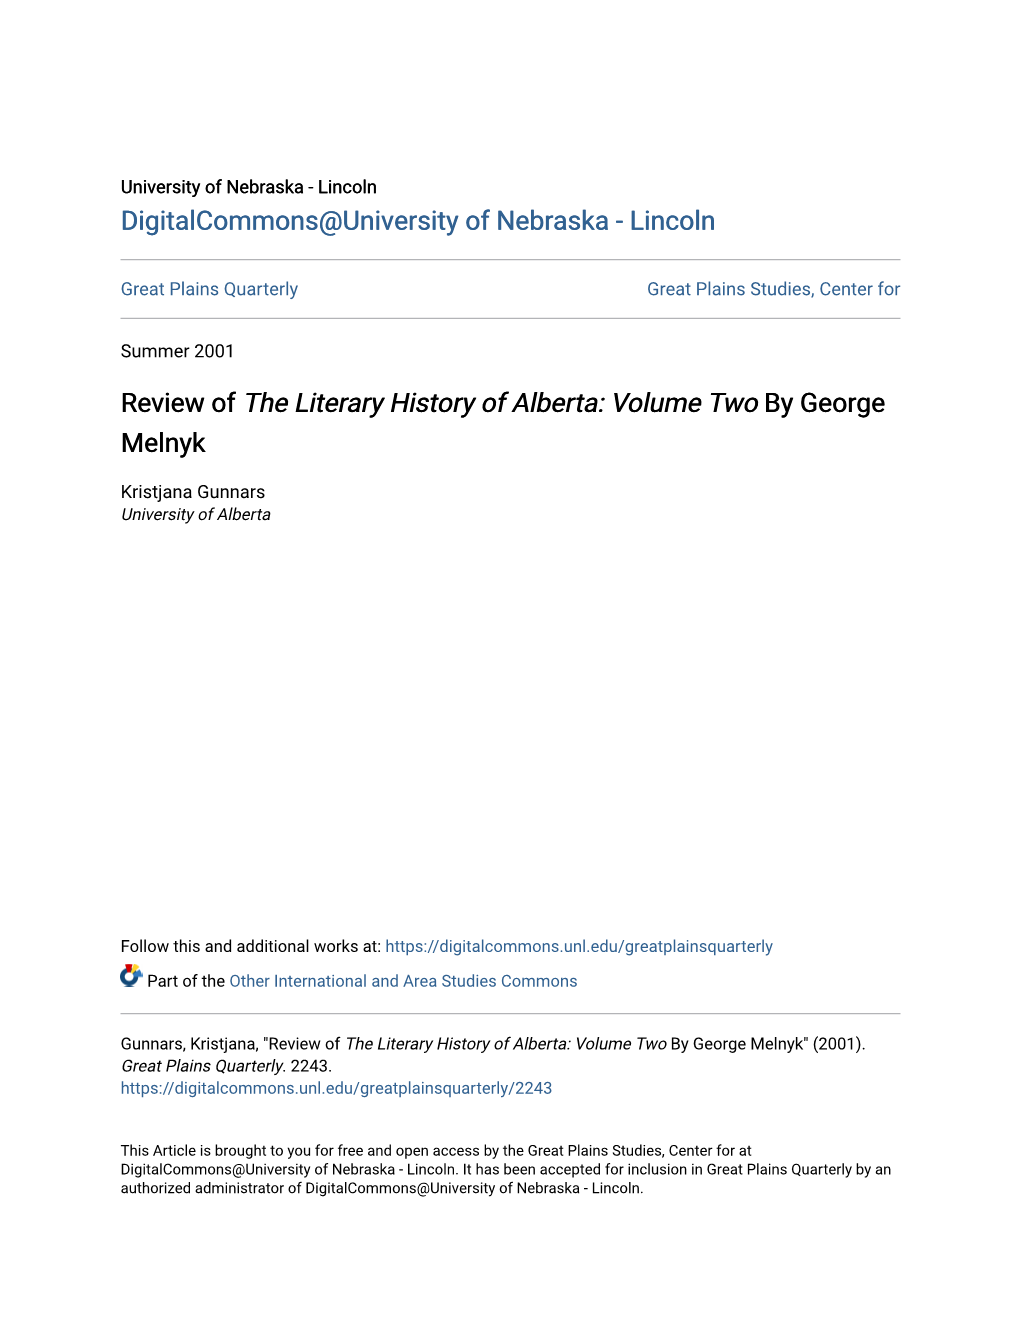 Review of the Literary History of Alberta: Volume Two by George Melnyk